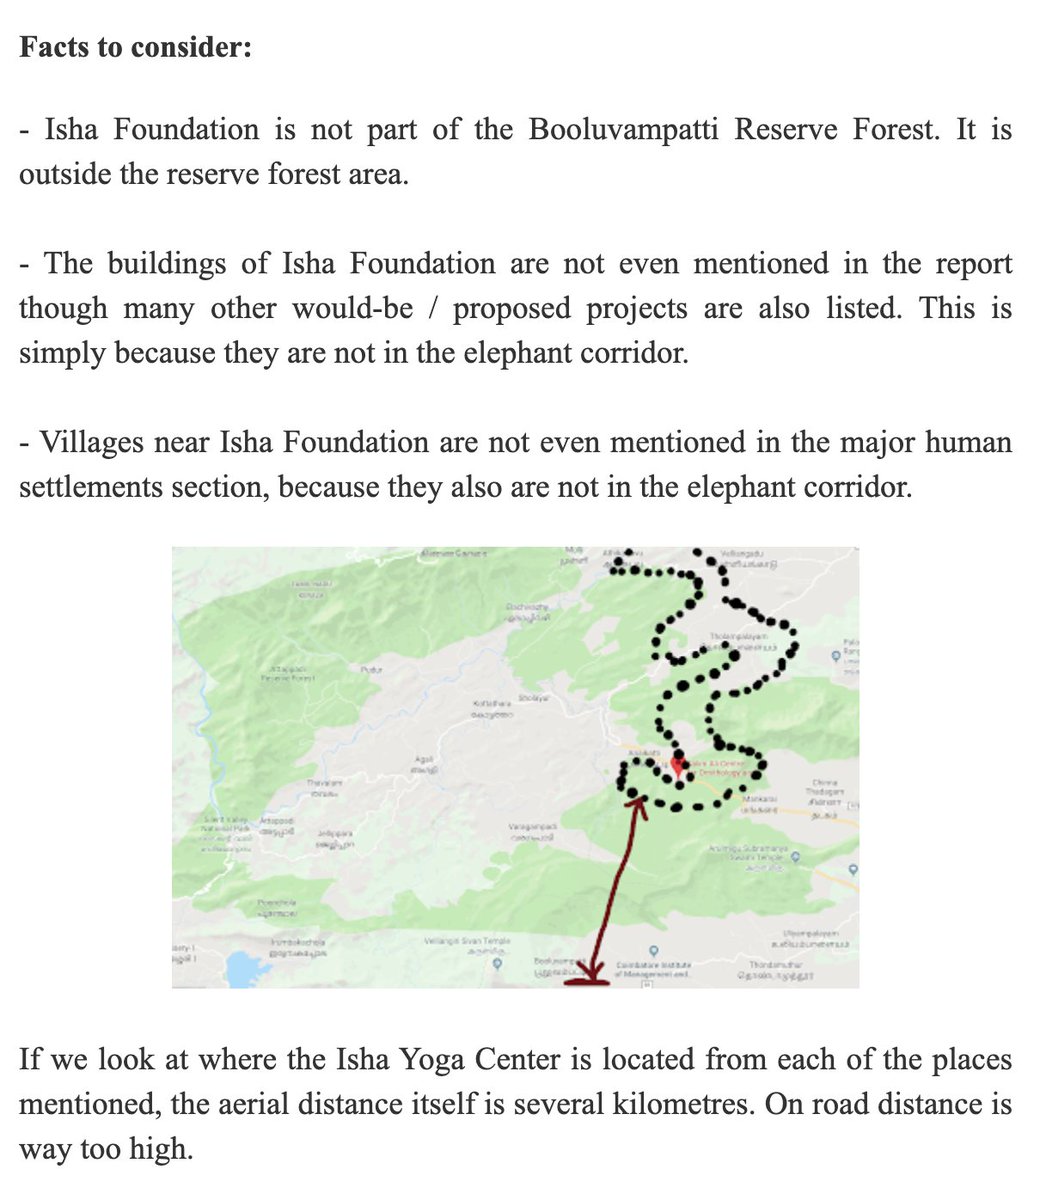 Basically, these  #HyenaActivists are trying to cement a baseless allegation on the Isha Foundation that  #Isha Yoga Center in Coimbatore is in an  #ElephantCorridor. However, this allegation has been disproved many times over it is not so. Clear proofs:  http://bit.ly/ElephantCorridor